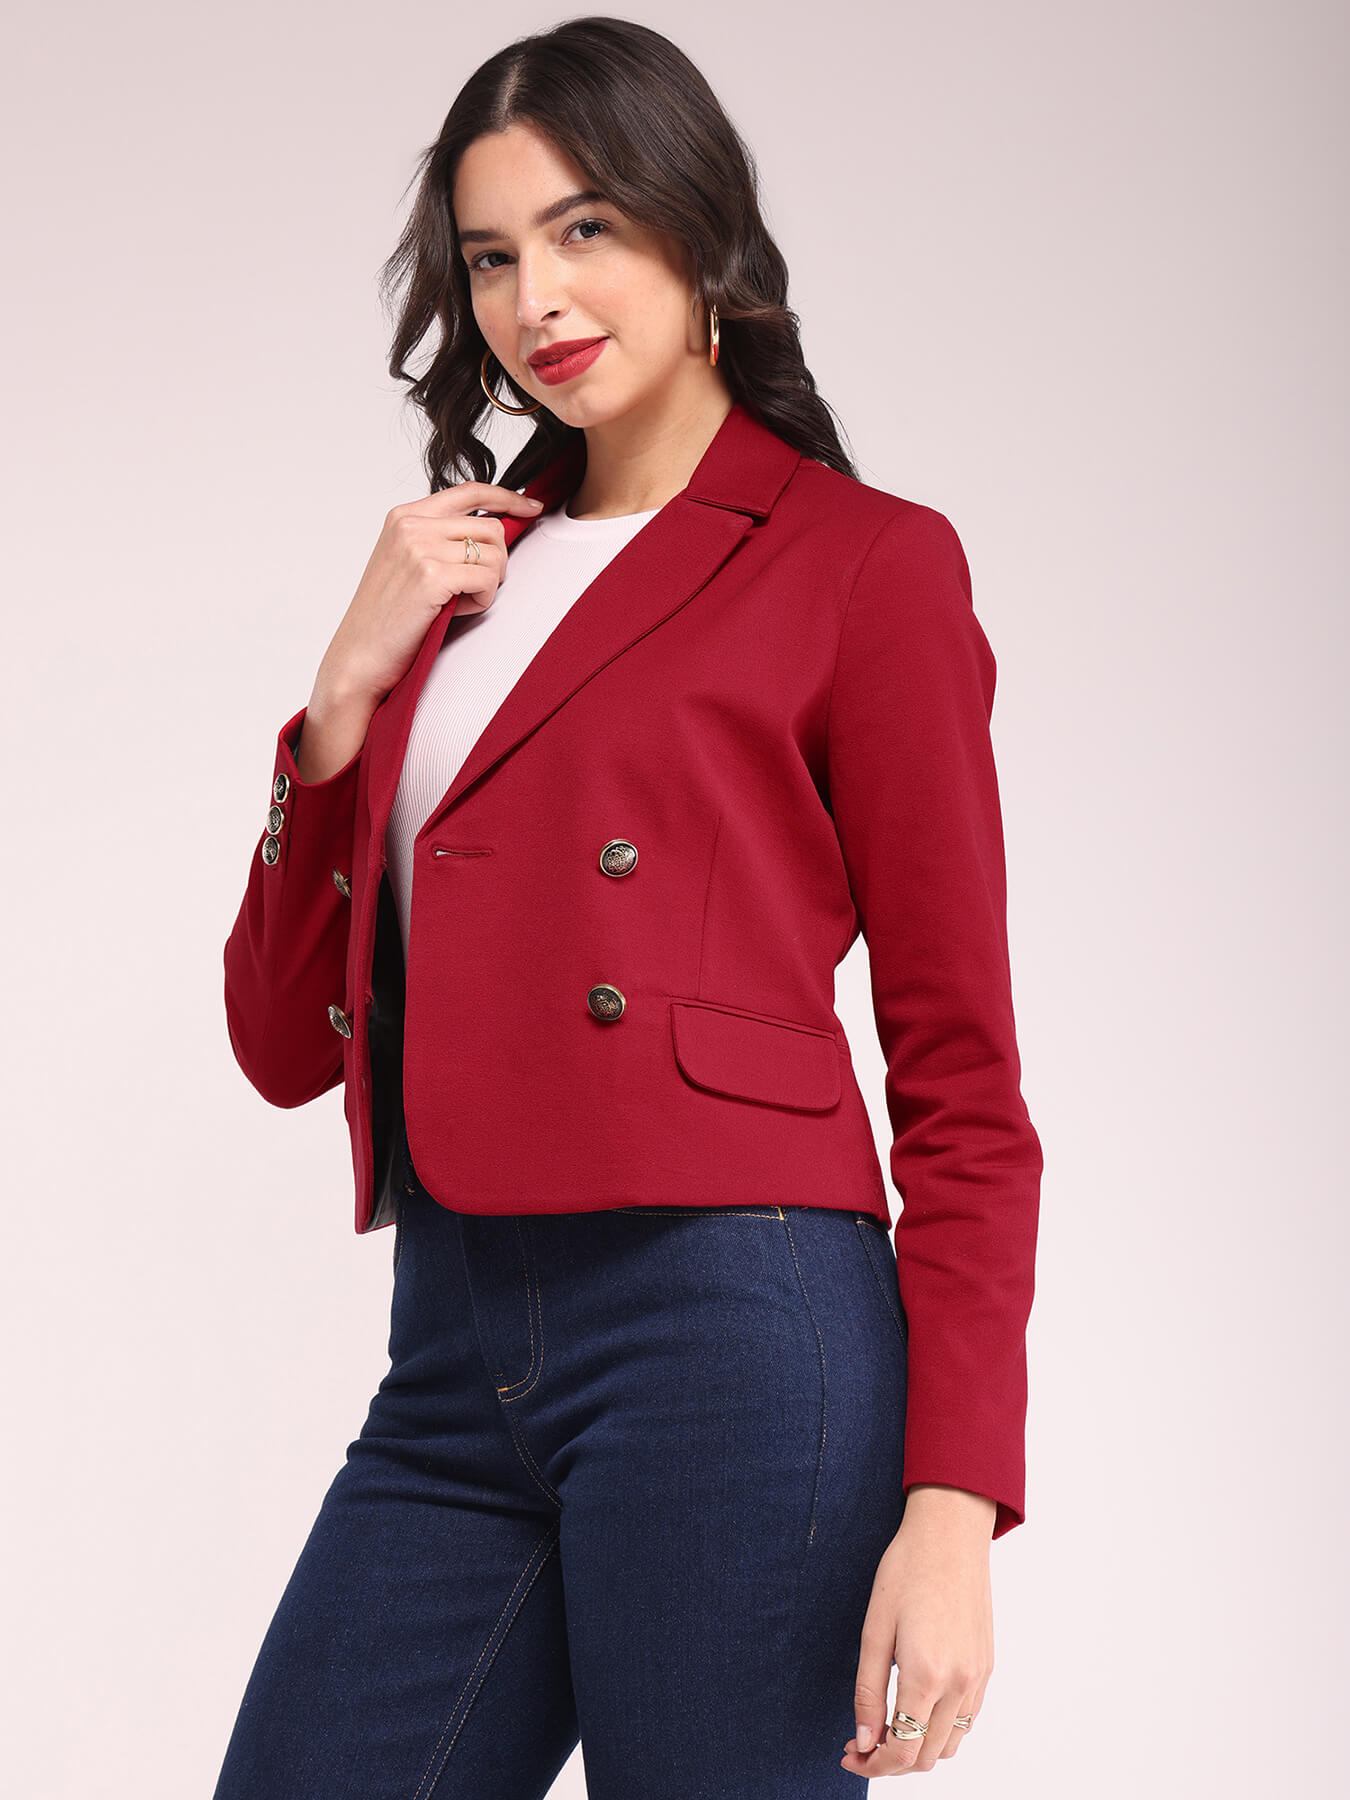 Double Breasted Short Jacket - Red